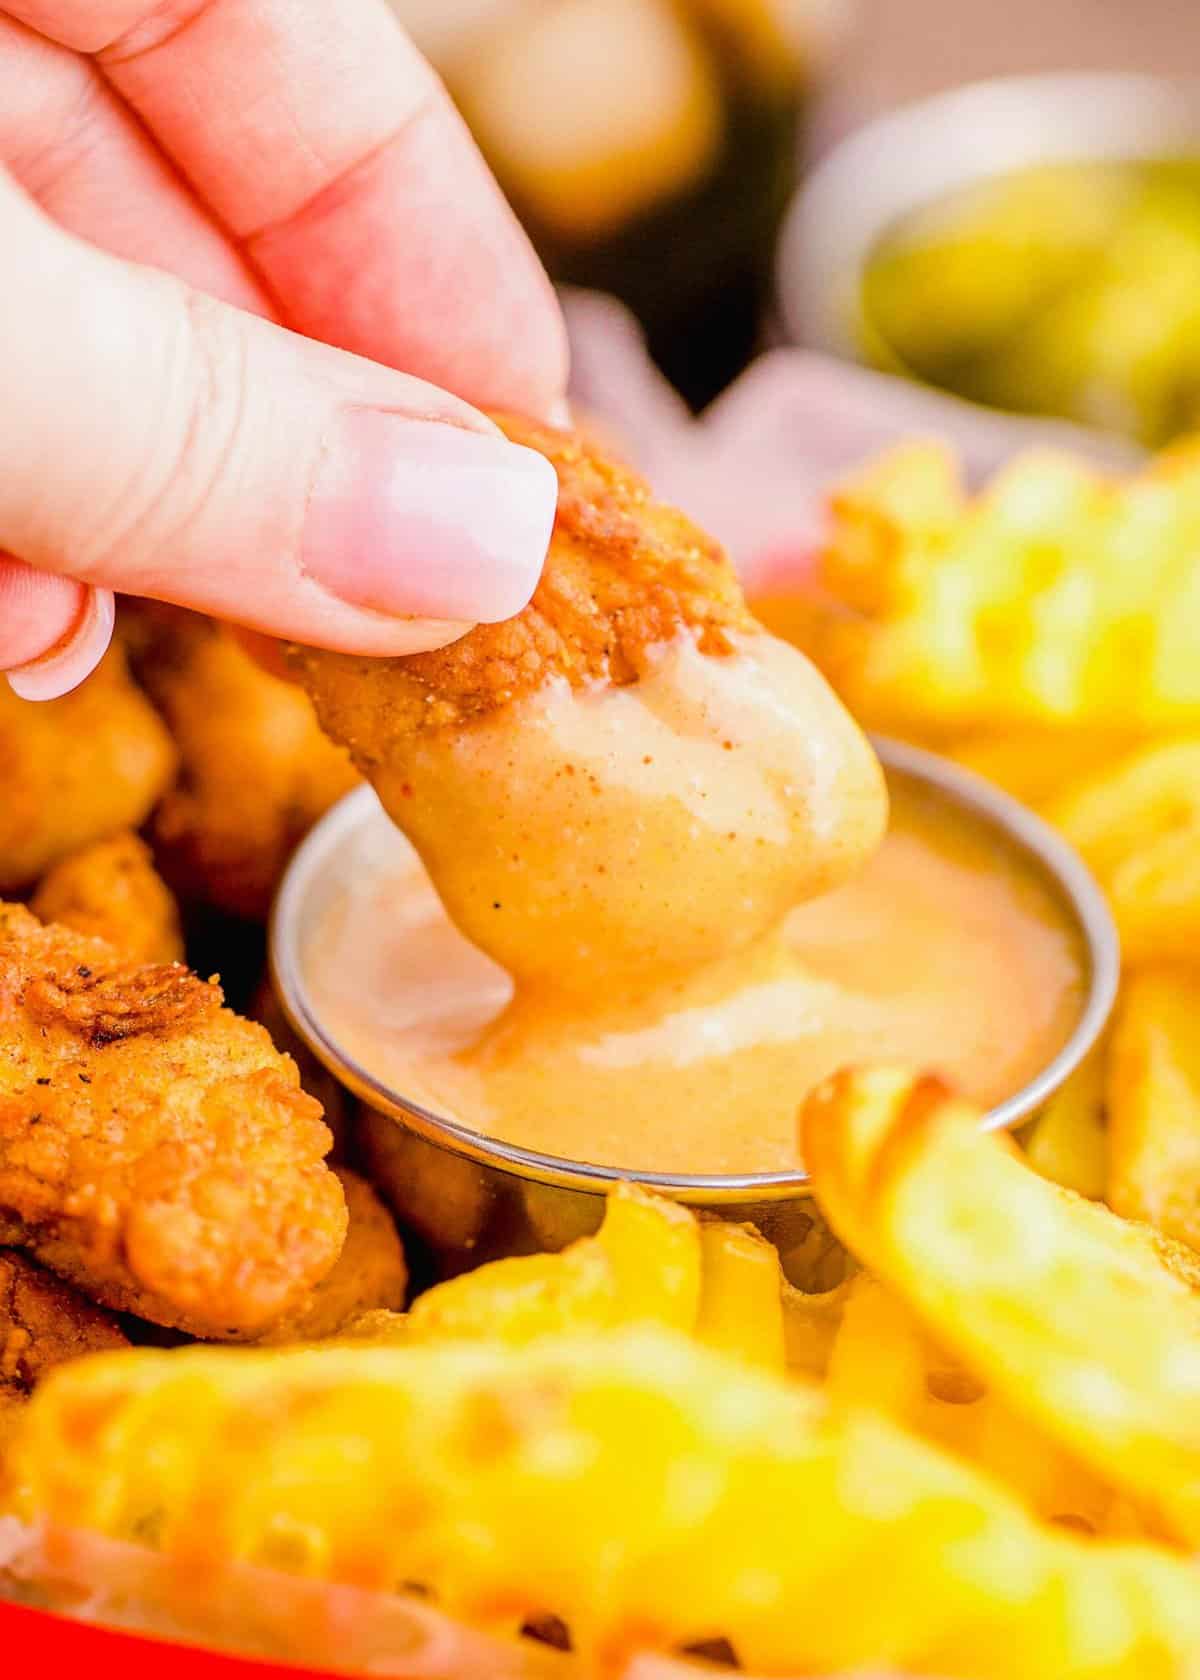 Hand dipping nugget into Chick-Fil-A sauce